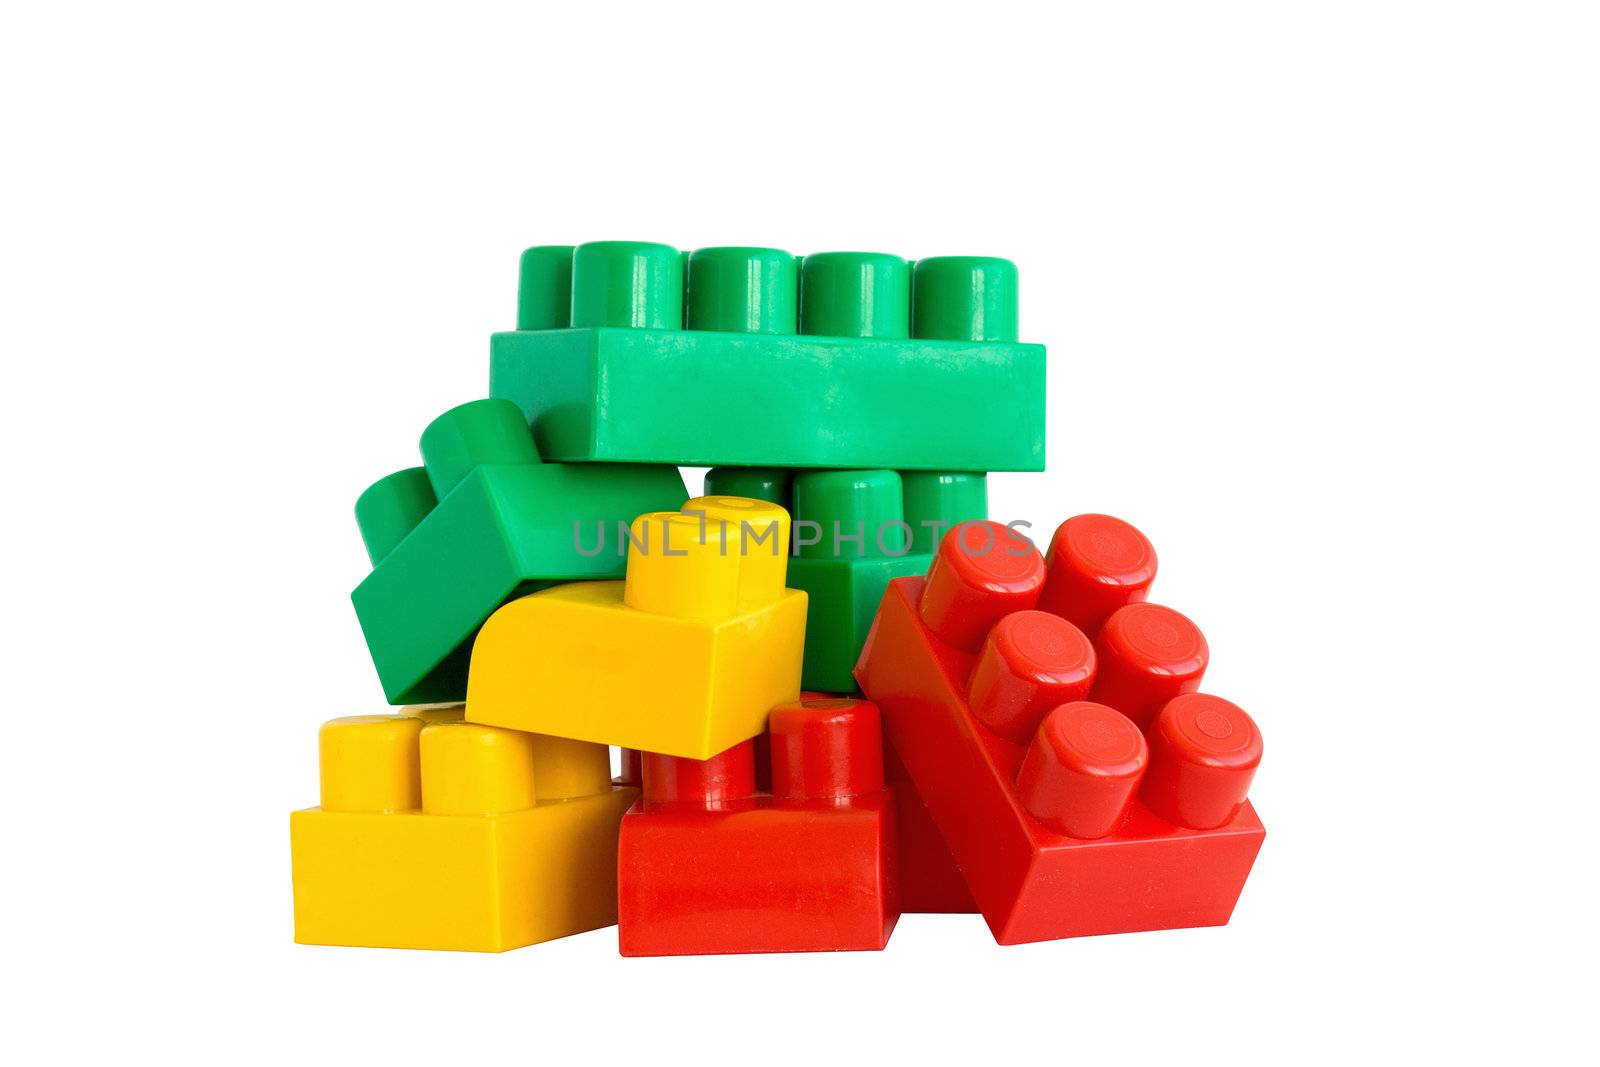 Colored Lego blocks for building houses for the children.